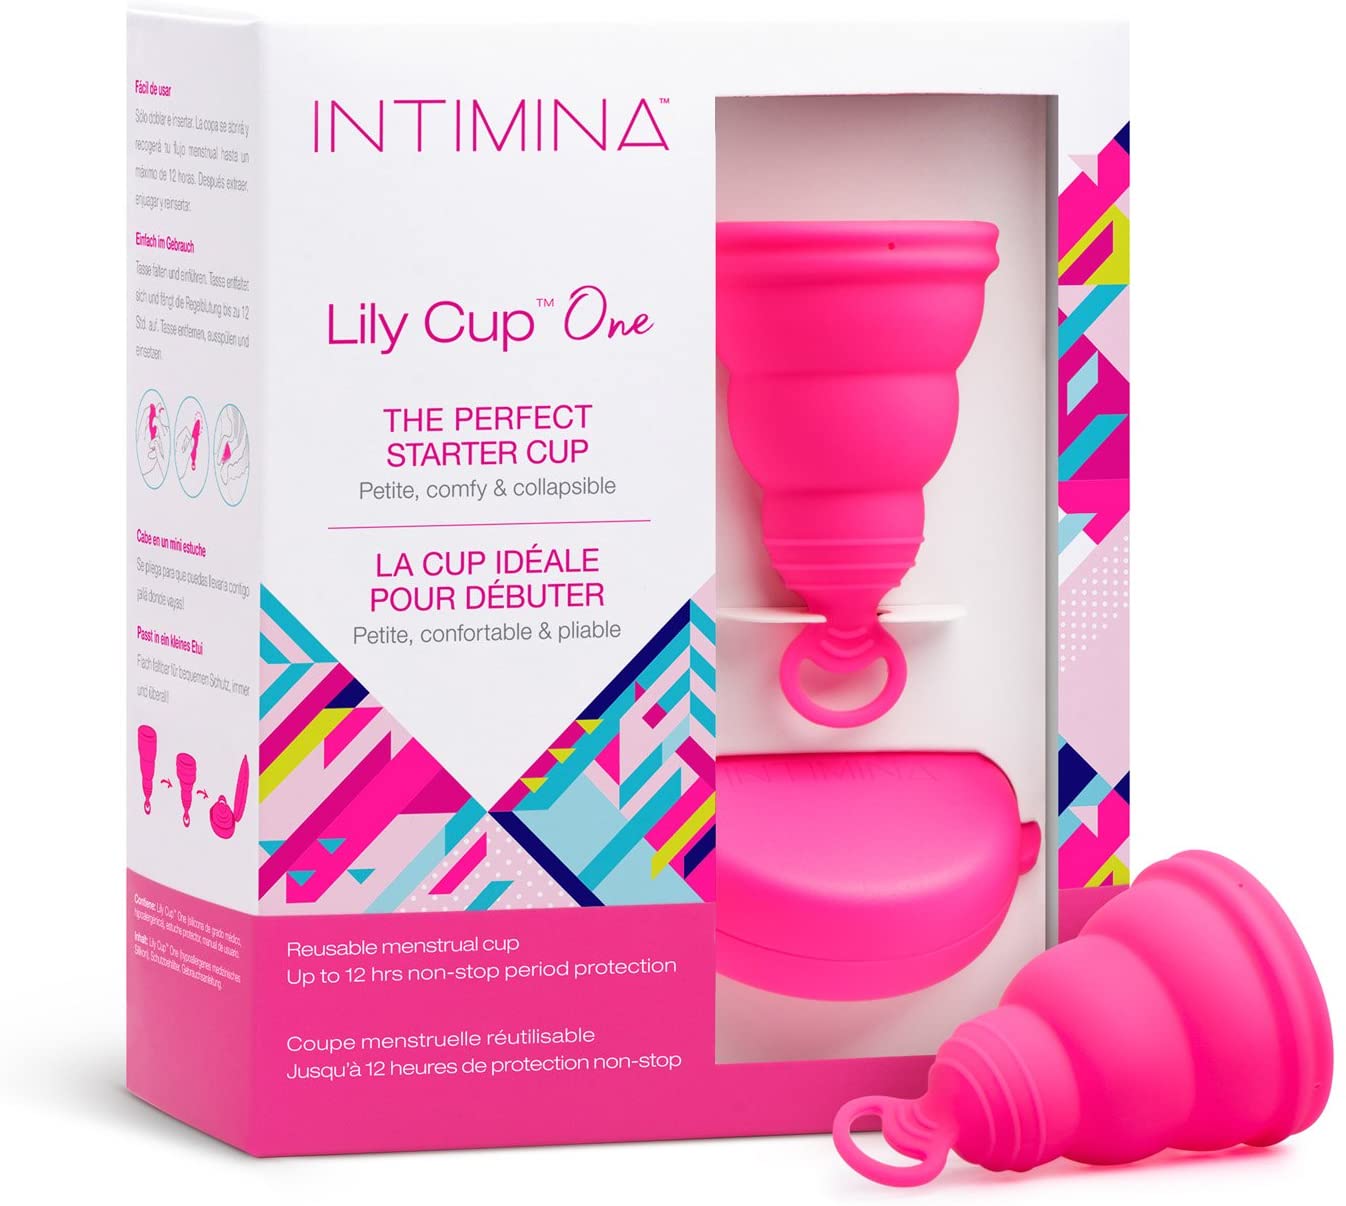 buy online Lily Cup One The Perfect Menstrual Cup Starter #6065 - Intimina starter  Qatar Doha